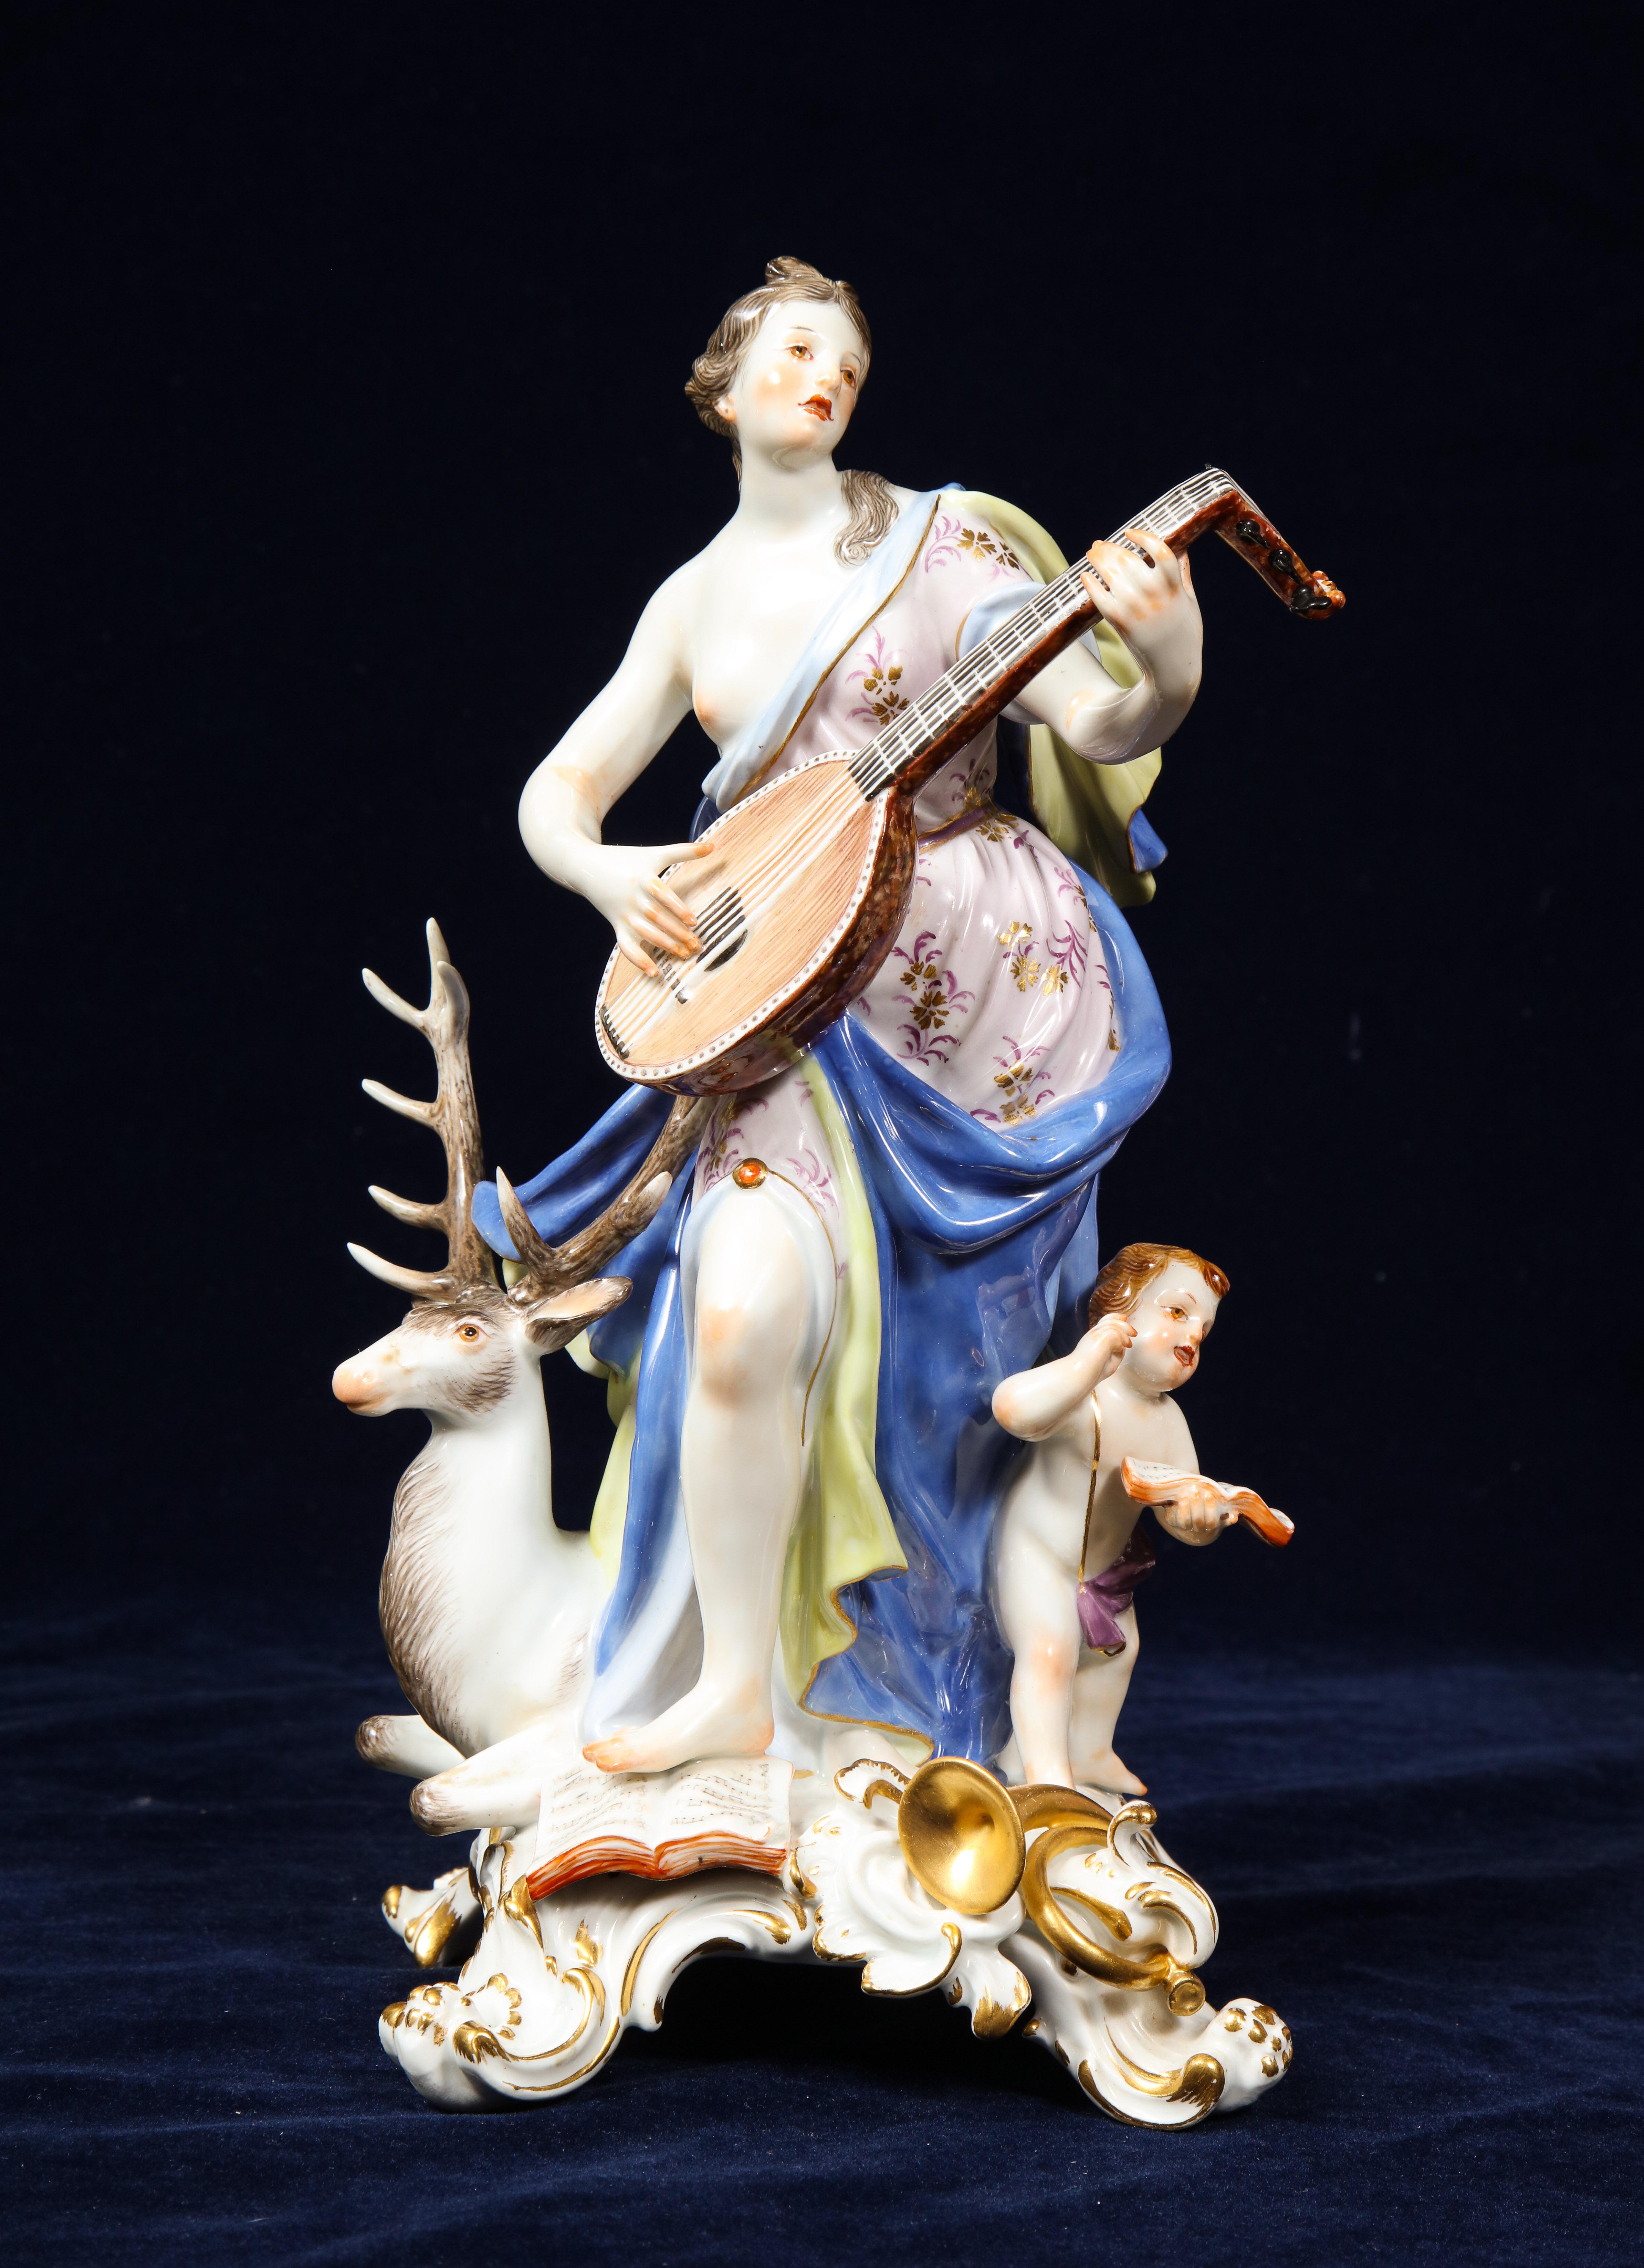 A magnificent and fully complete set of 5 Meissen figures emblematic of the senses: Hearing, smell, touch, taste, and sight, Modeled by J.J. Kändler and J.F. Eberlein. These figures are the best quality that Meissen offers, very well hand painted